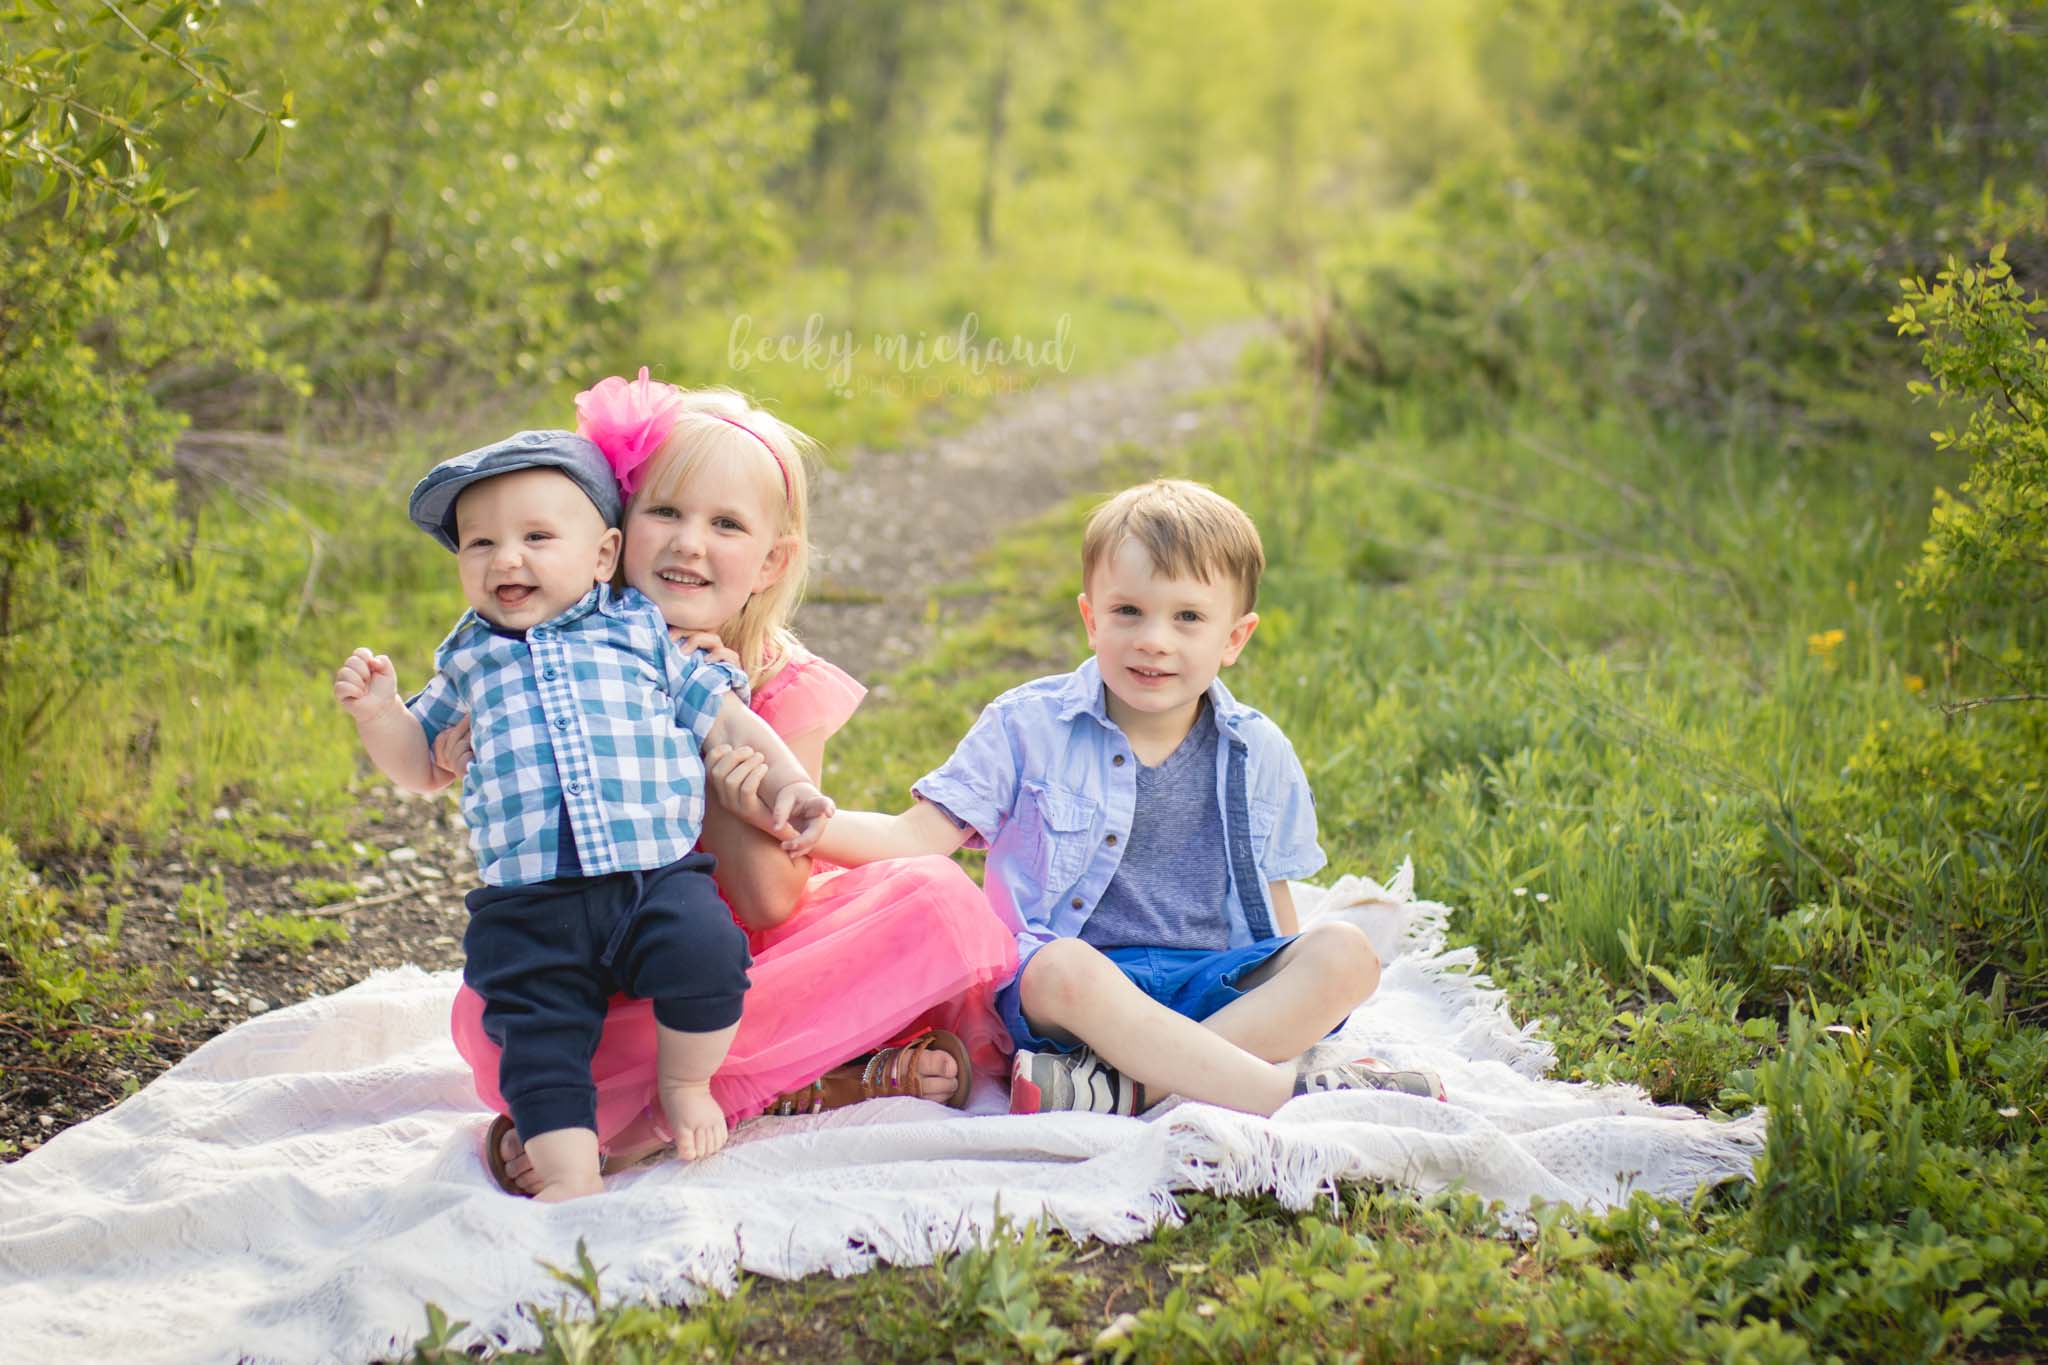 Becky Michaud Photography - Fort Collins - Family Photographer